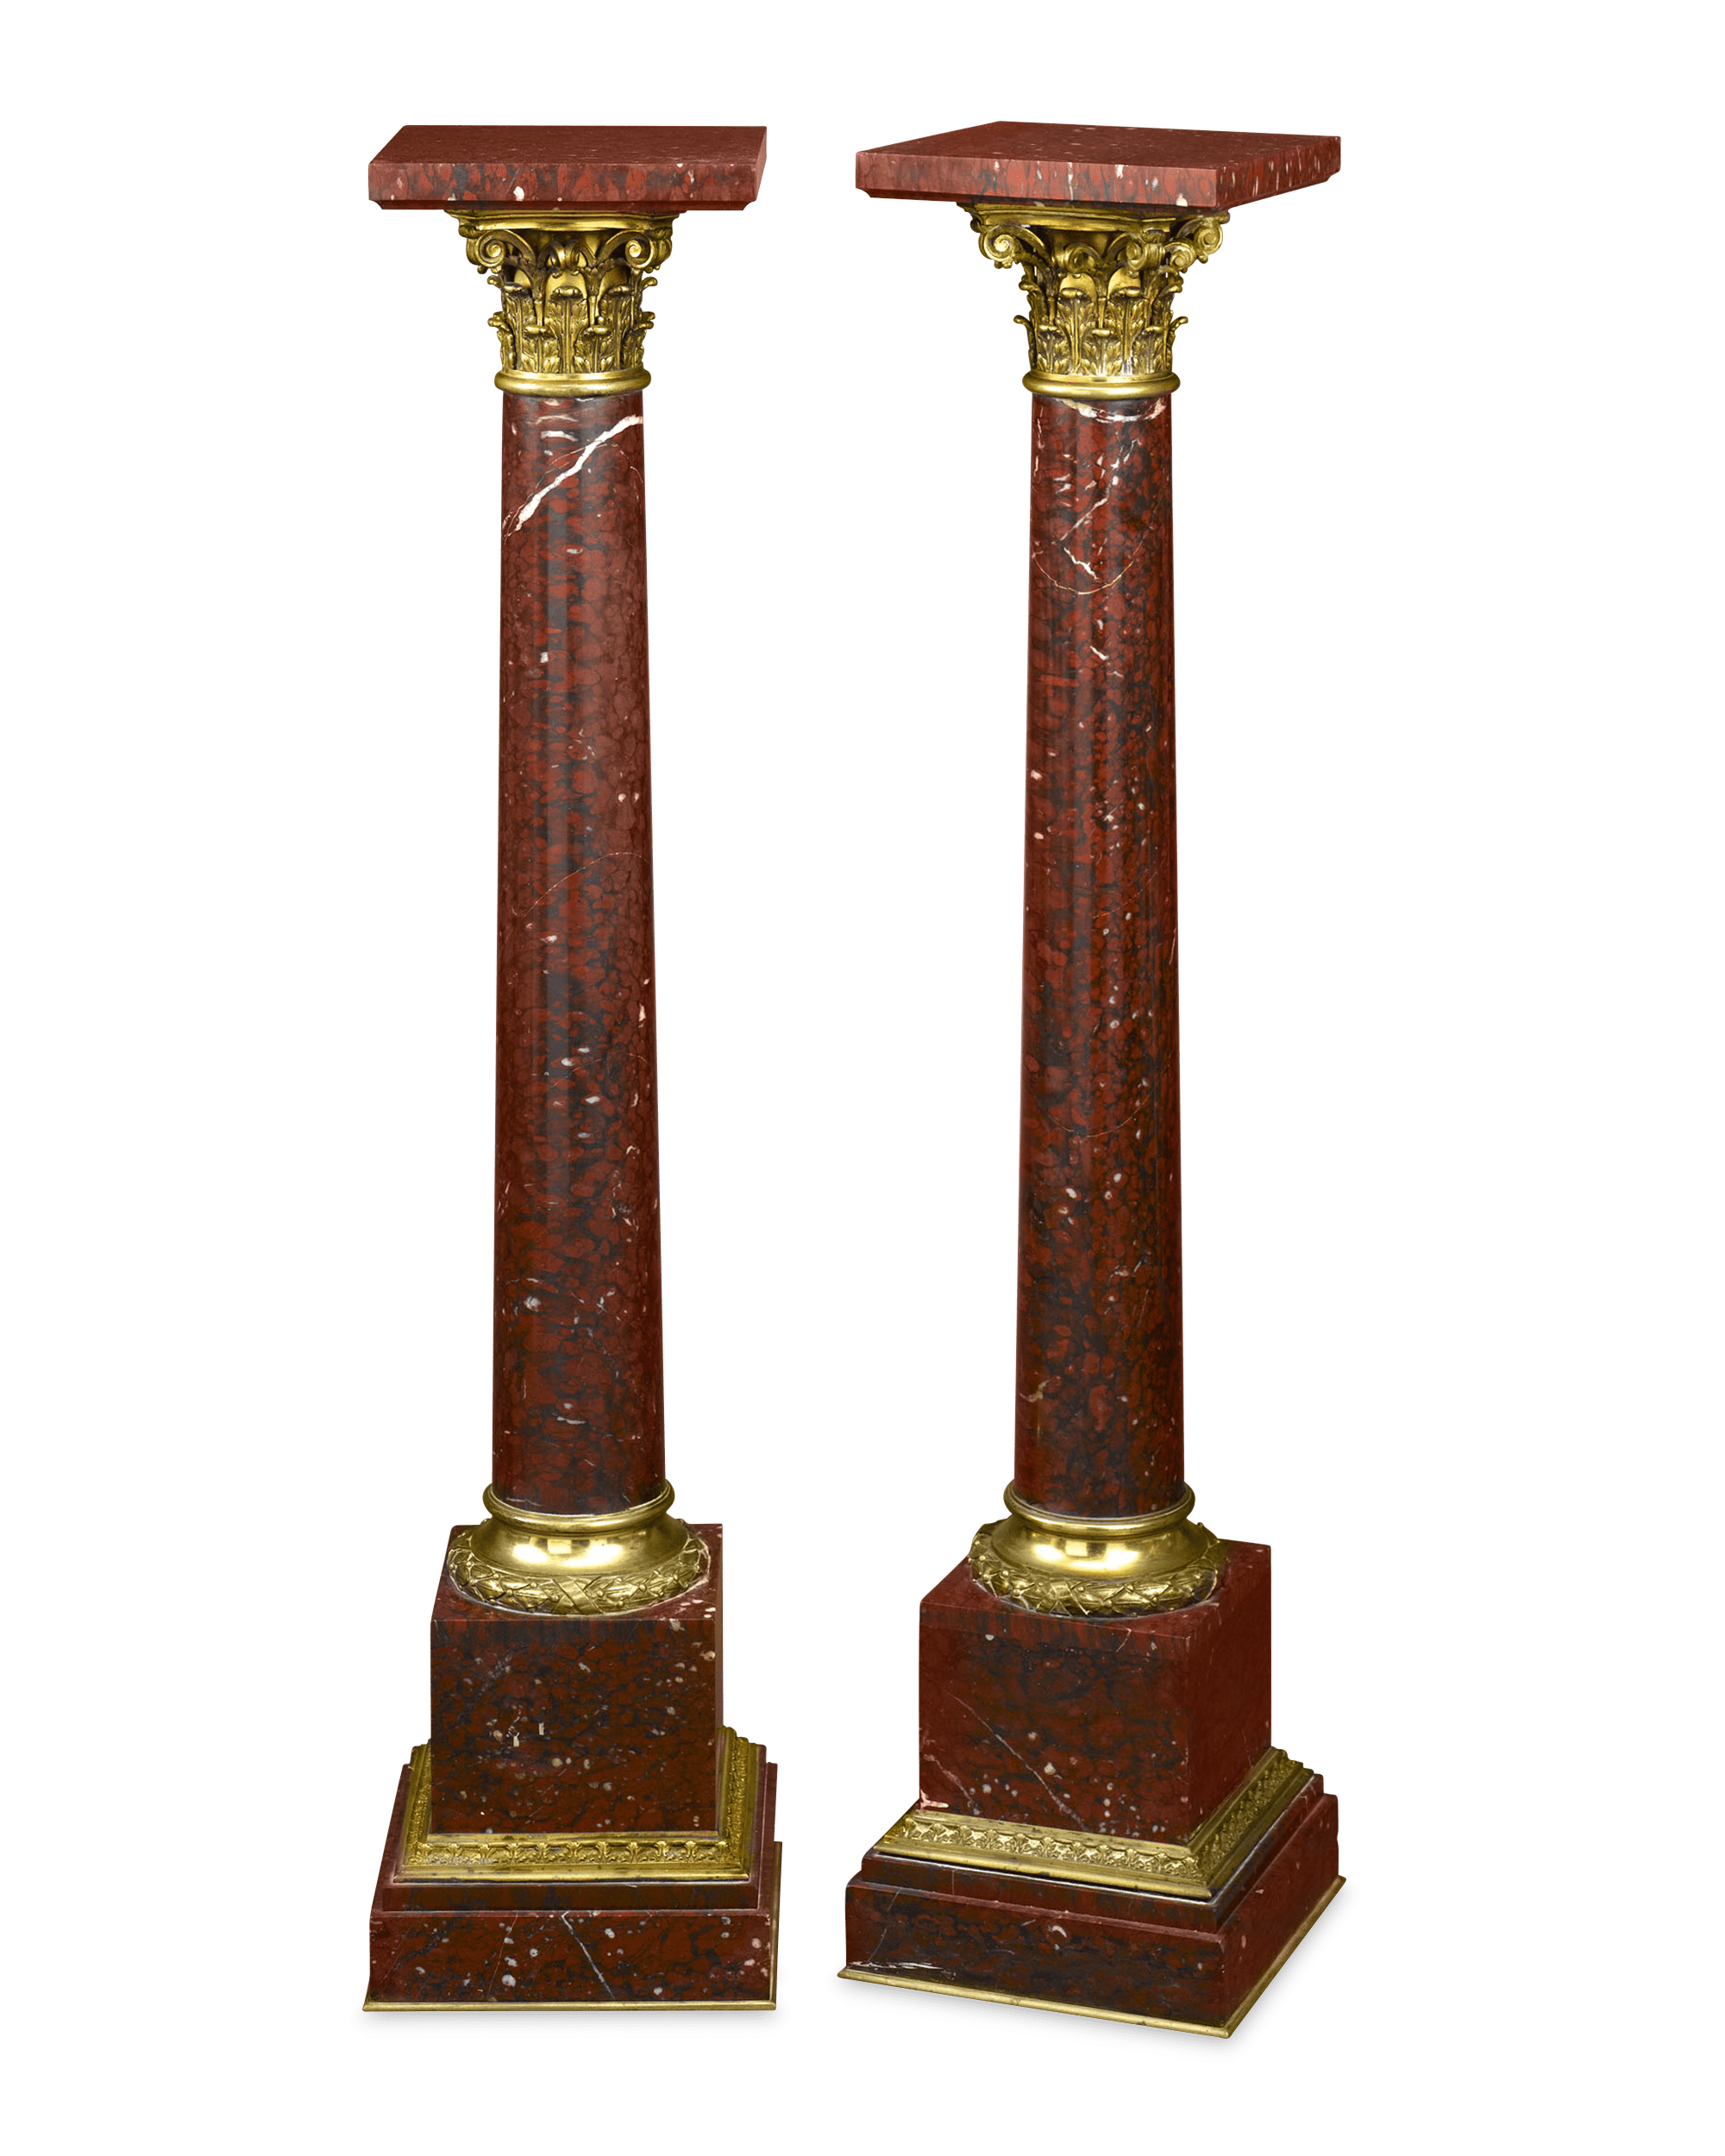 Crafted of rouge griotte marble, these pedestals take the form of Corinthian columns